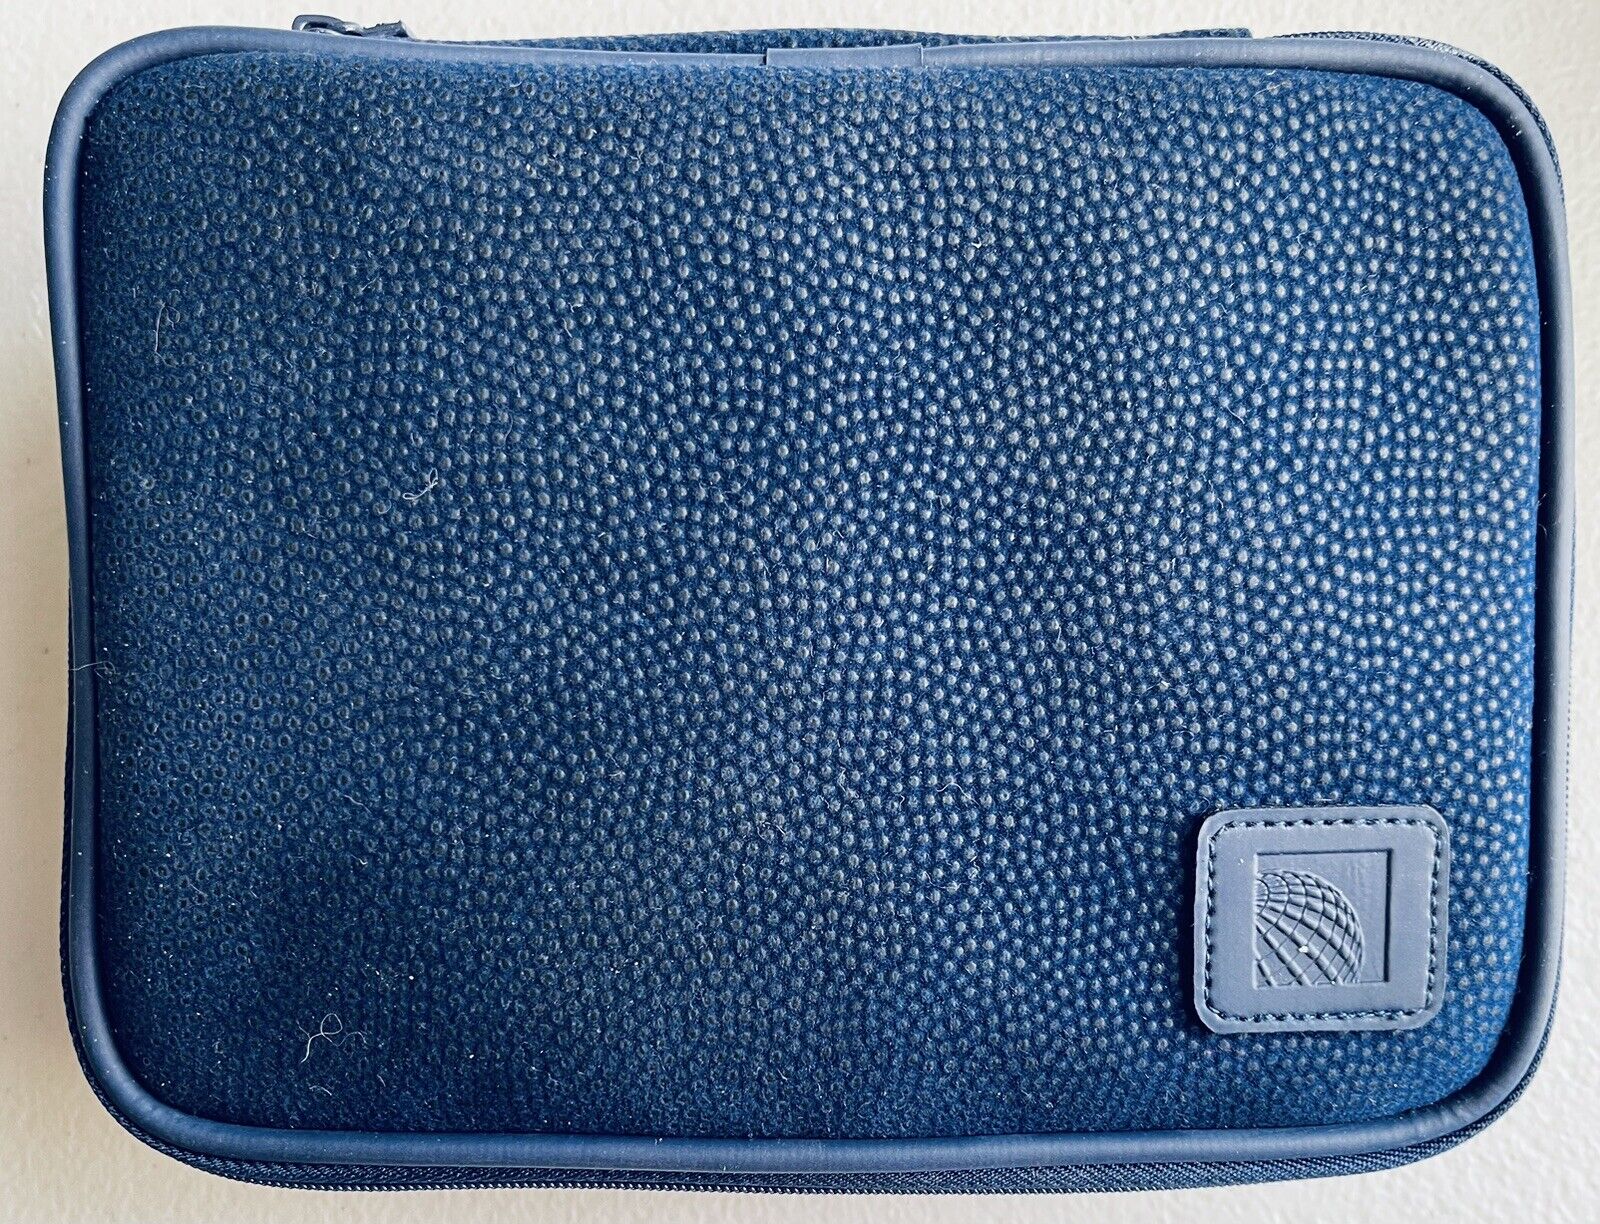 Continental Airlines Amenity Kit Textured Clamshell Style- First Class - Unused